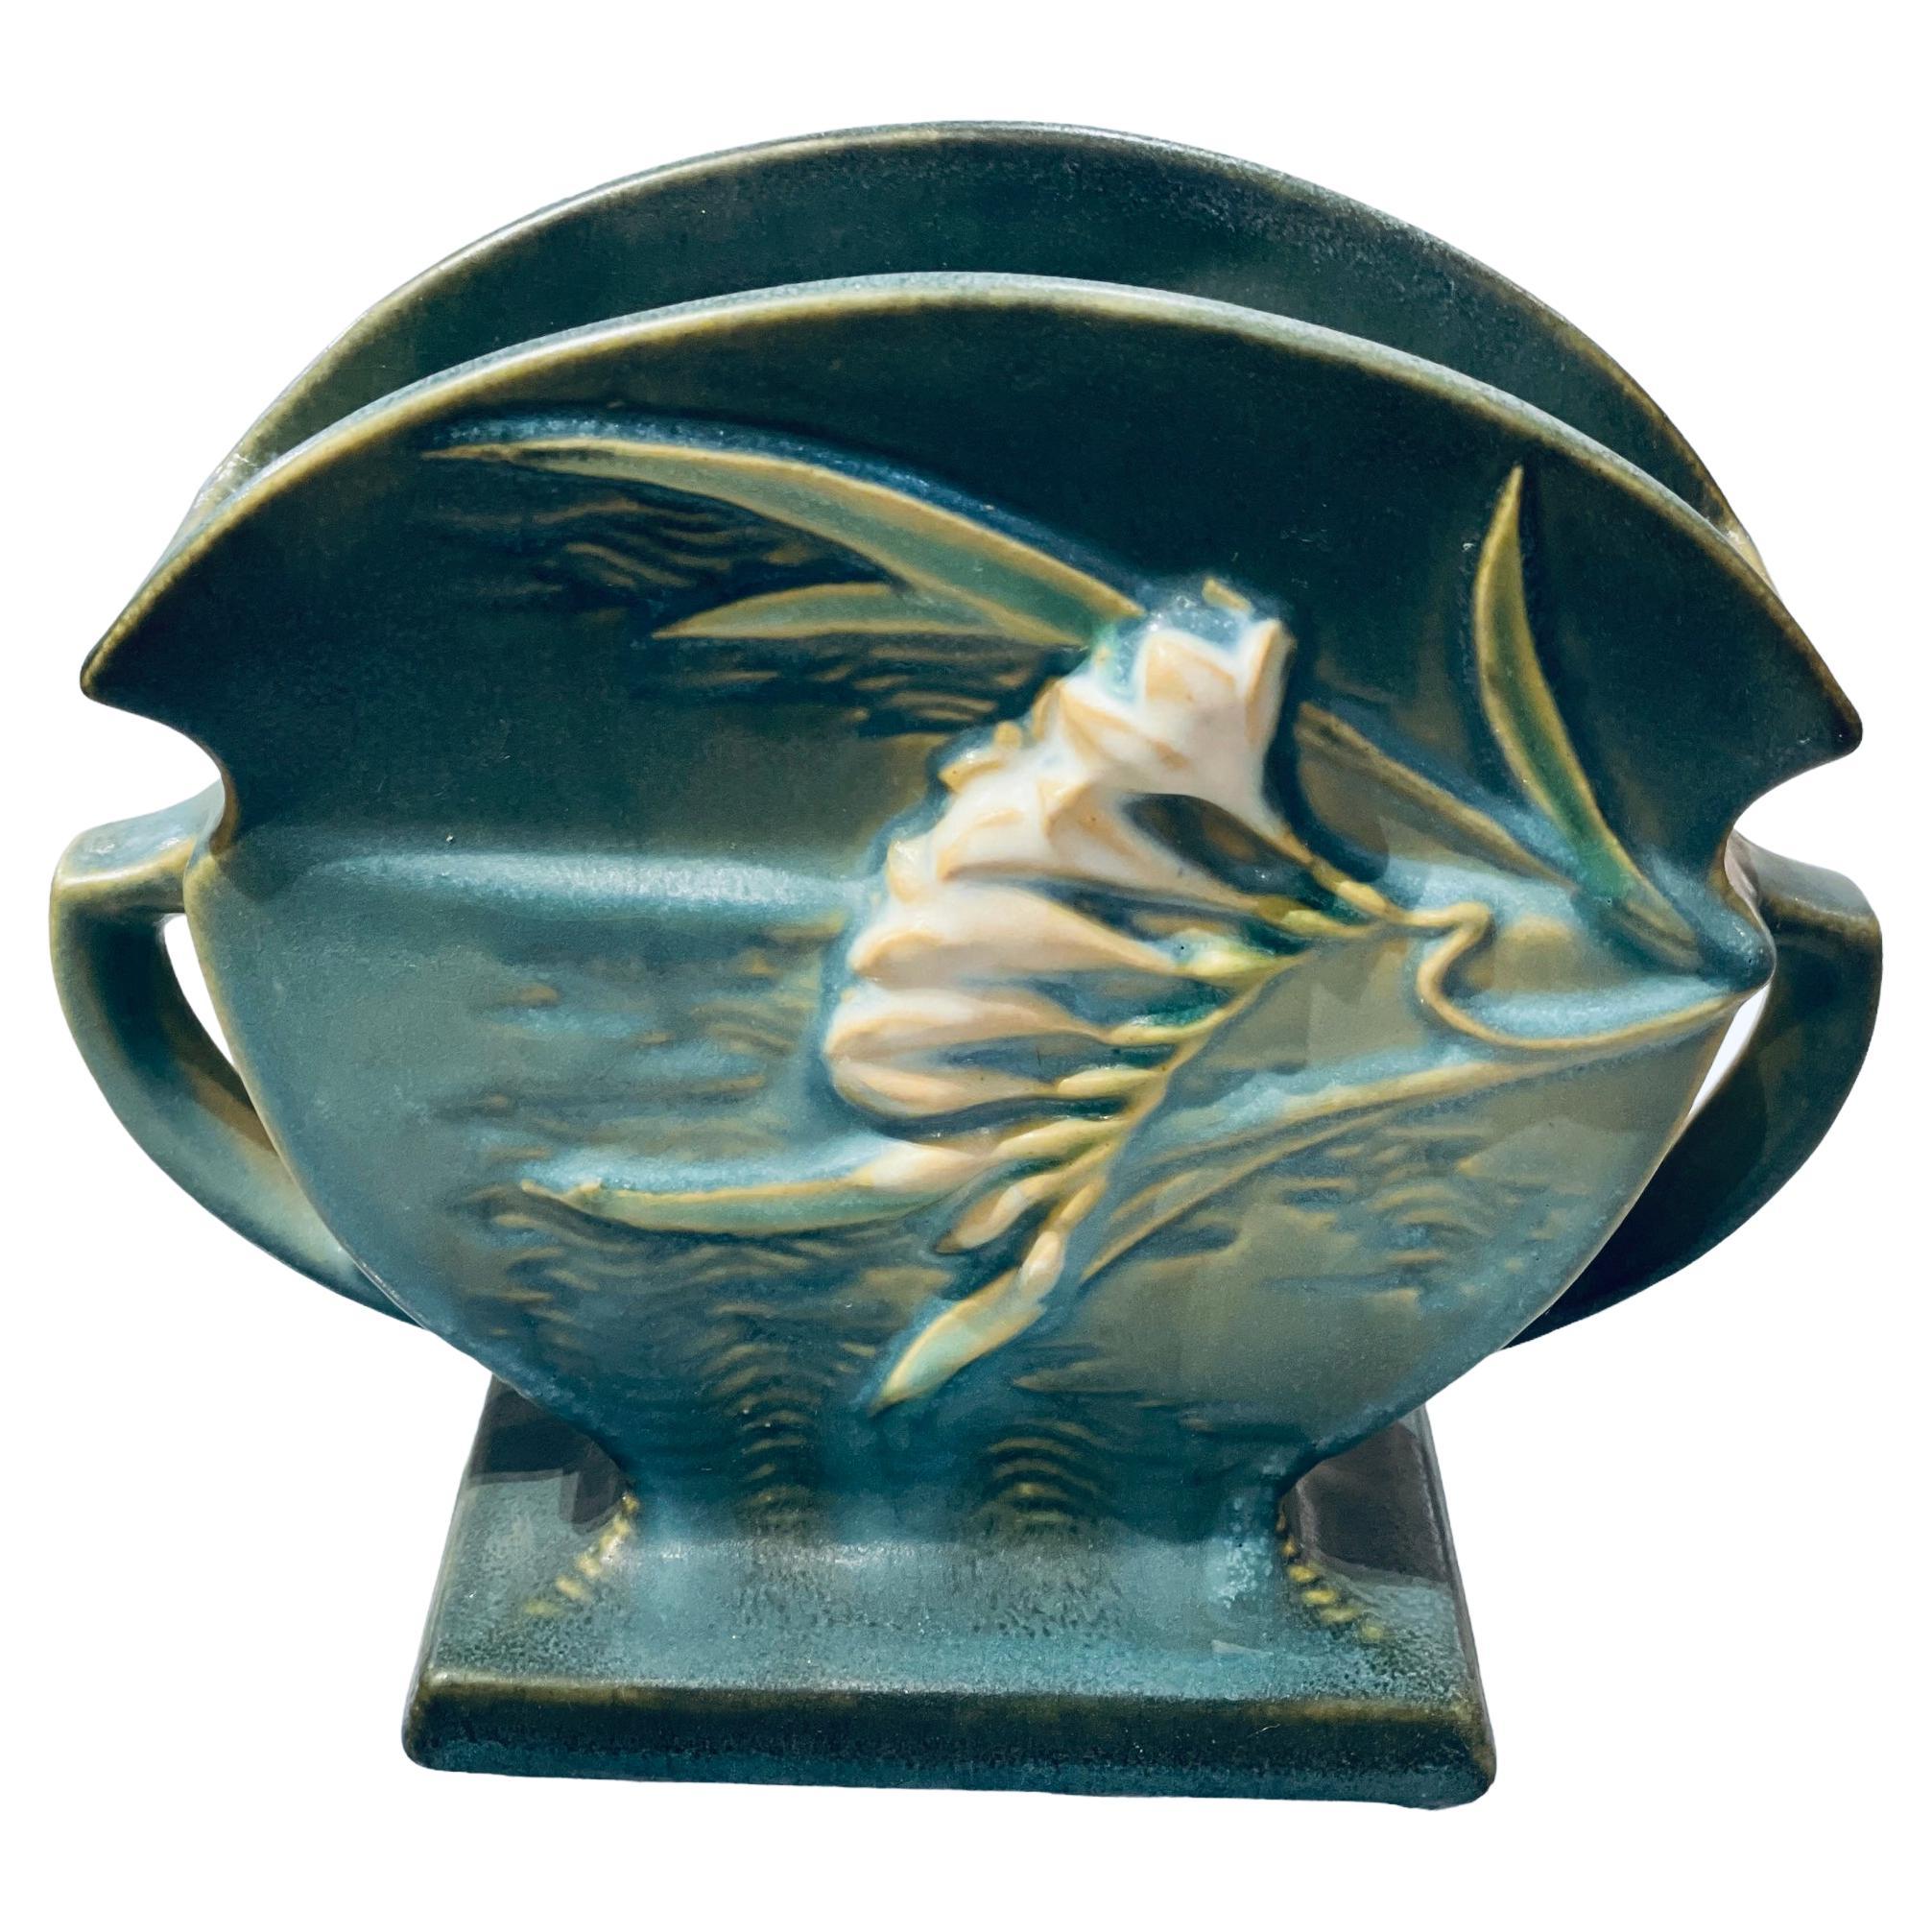 This is a green turquoise fan shaped Roseville vase. The fan shaped vase is attached to a rectangular base. It is decorated with a relief of long green yellow leaves & branches of Freesia purple and white flowers in the front and back. The upper